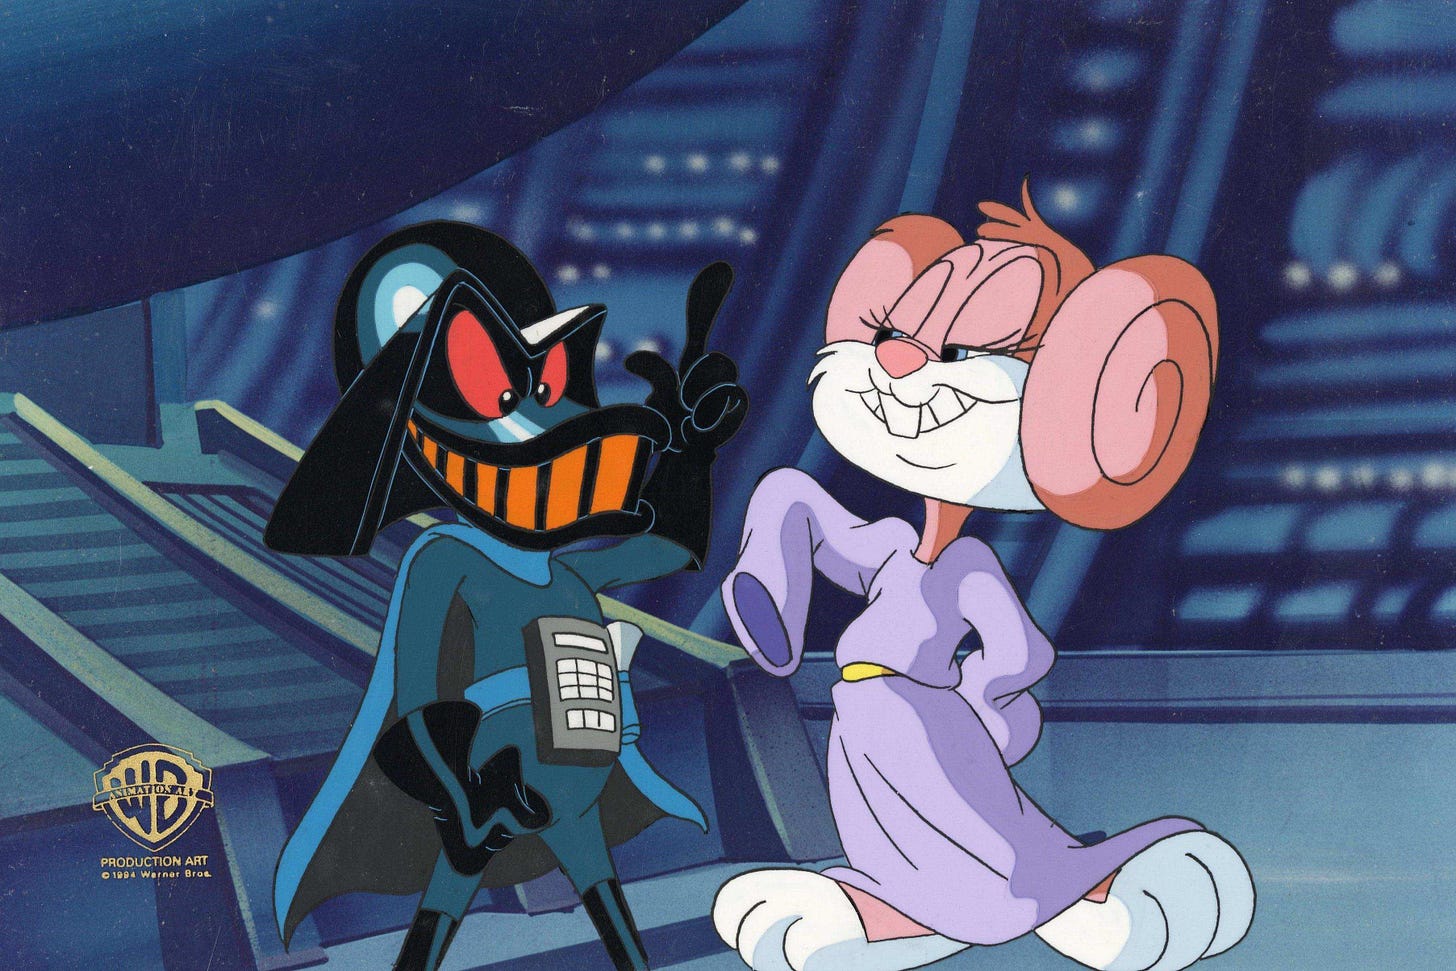 Duck Vader and Princess Babs, characters played by Plucky Duck and Babs Bunny, respectively, both make an appearance in Tiny Toon Adventures: Buster Busts Loose!